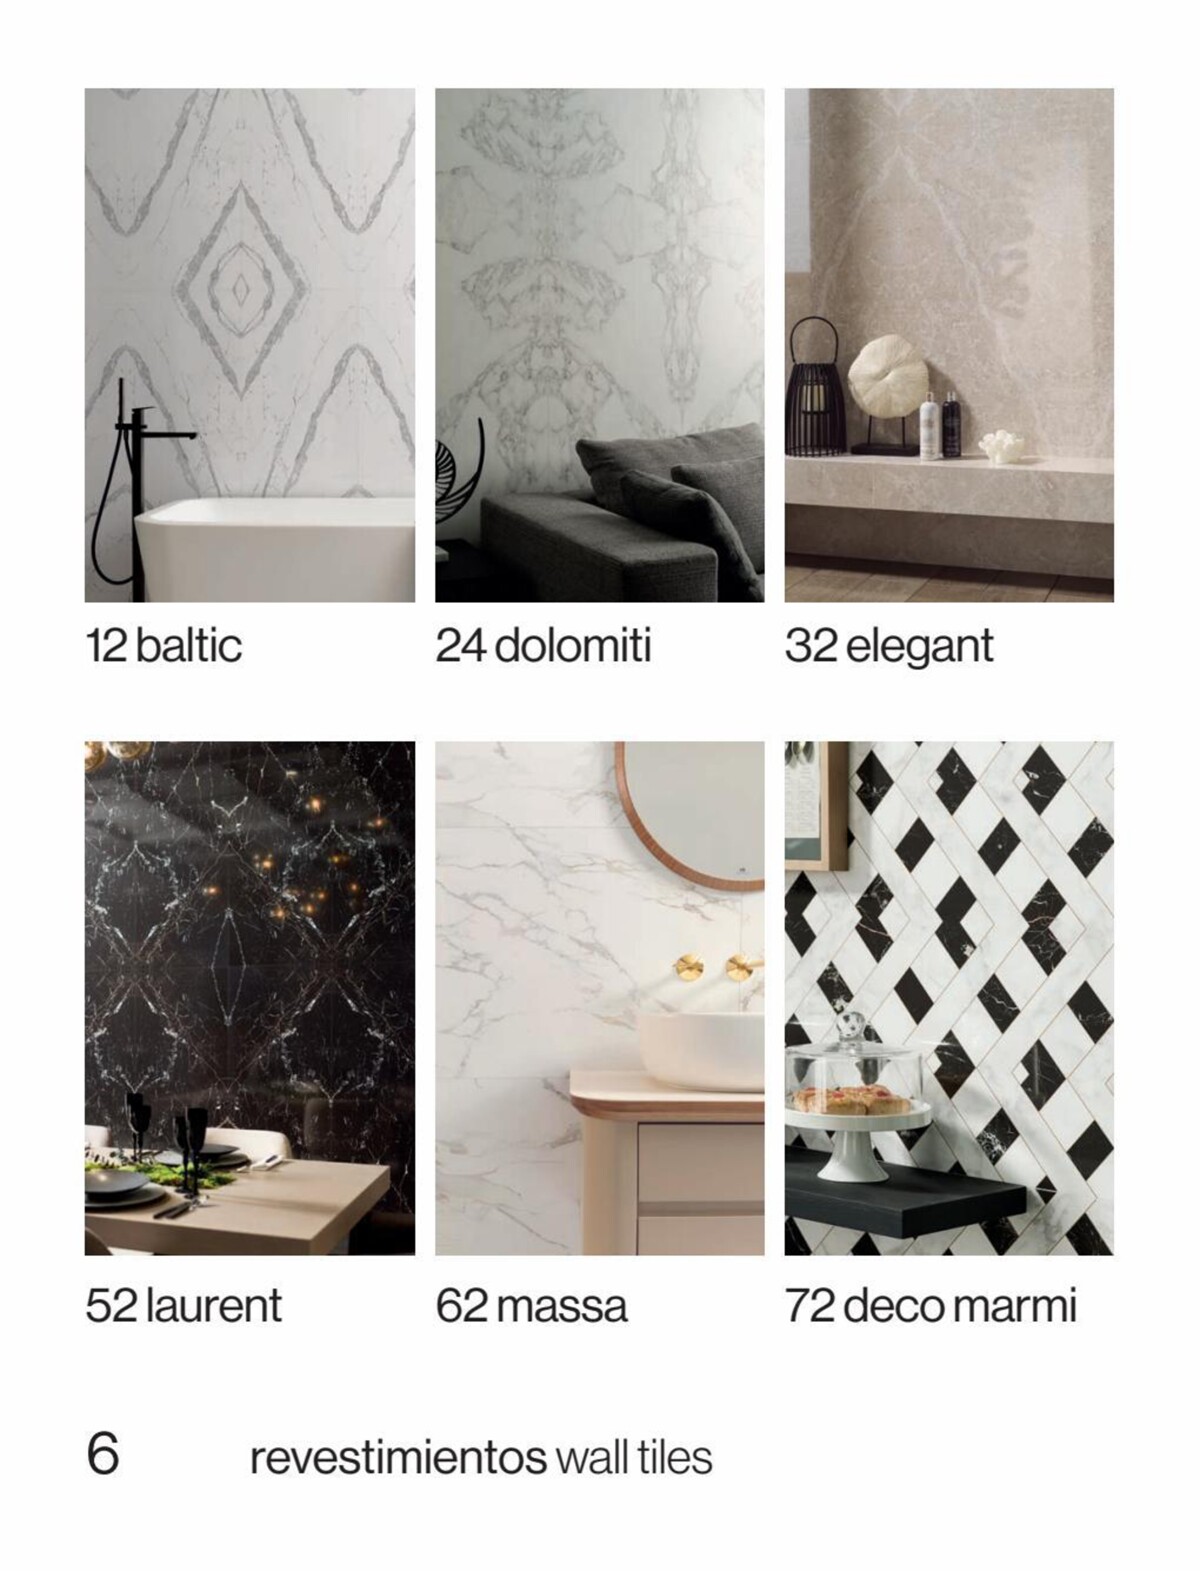 Catalogue MARMI,a ceramic tile that echoes the purity of marble, page 00006